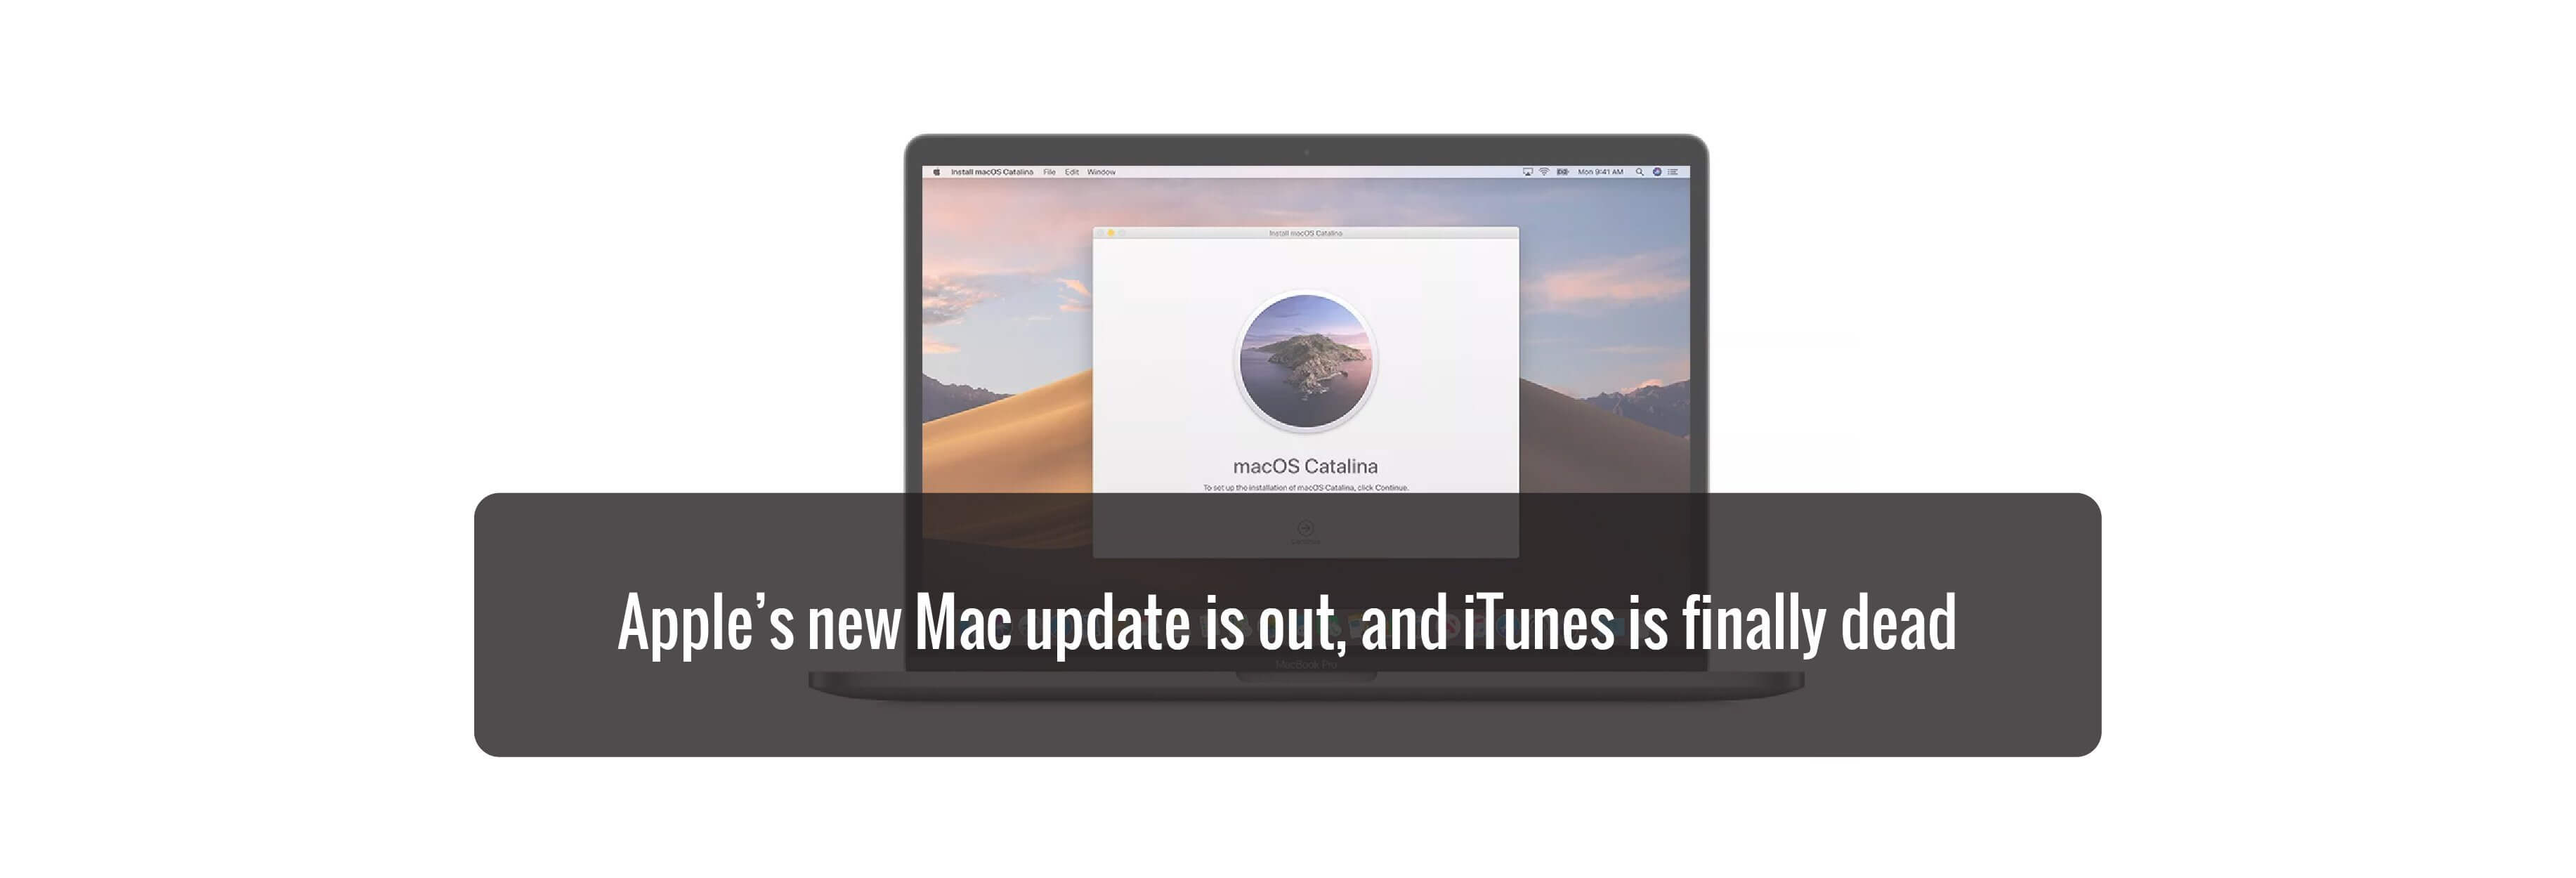 Apple’s new Mac update is out, and iTunes is finally dead